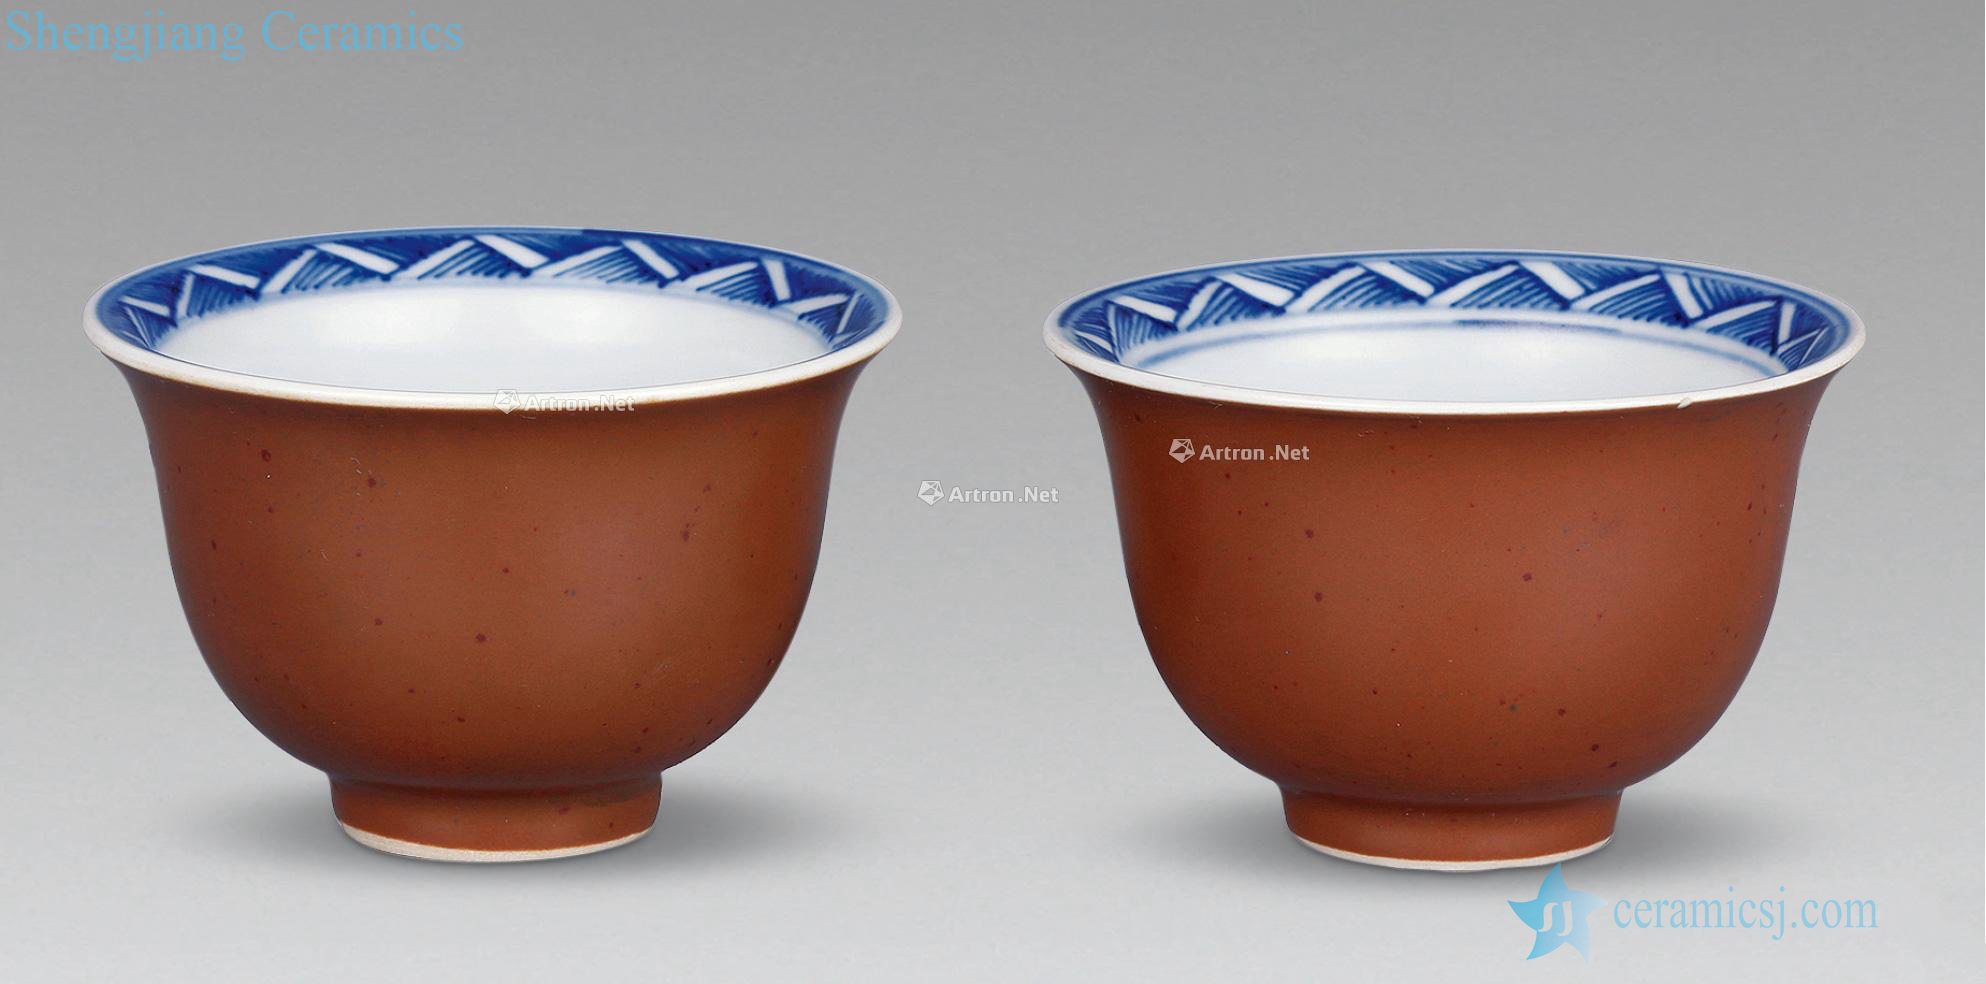 The qing emperor kangxi Character zijin glaze to light two things (a)